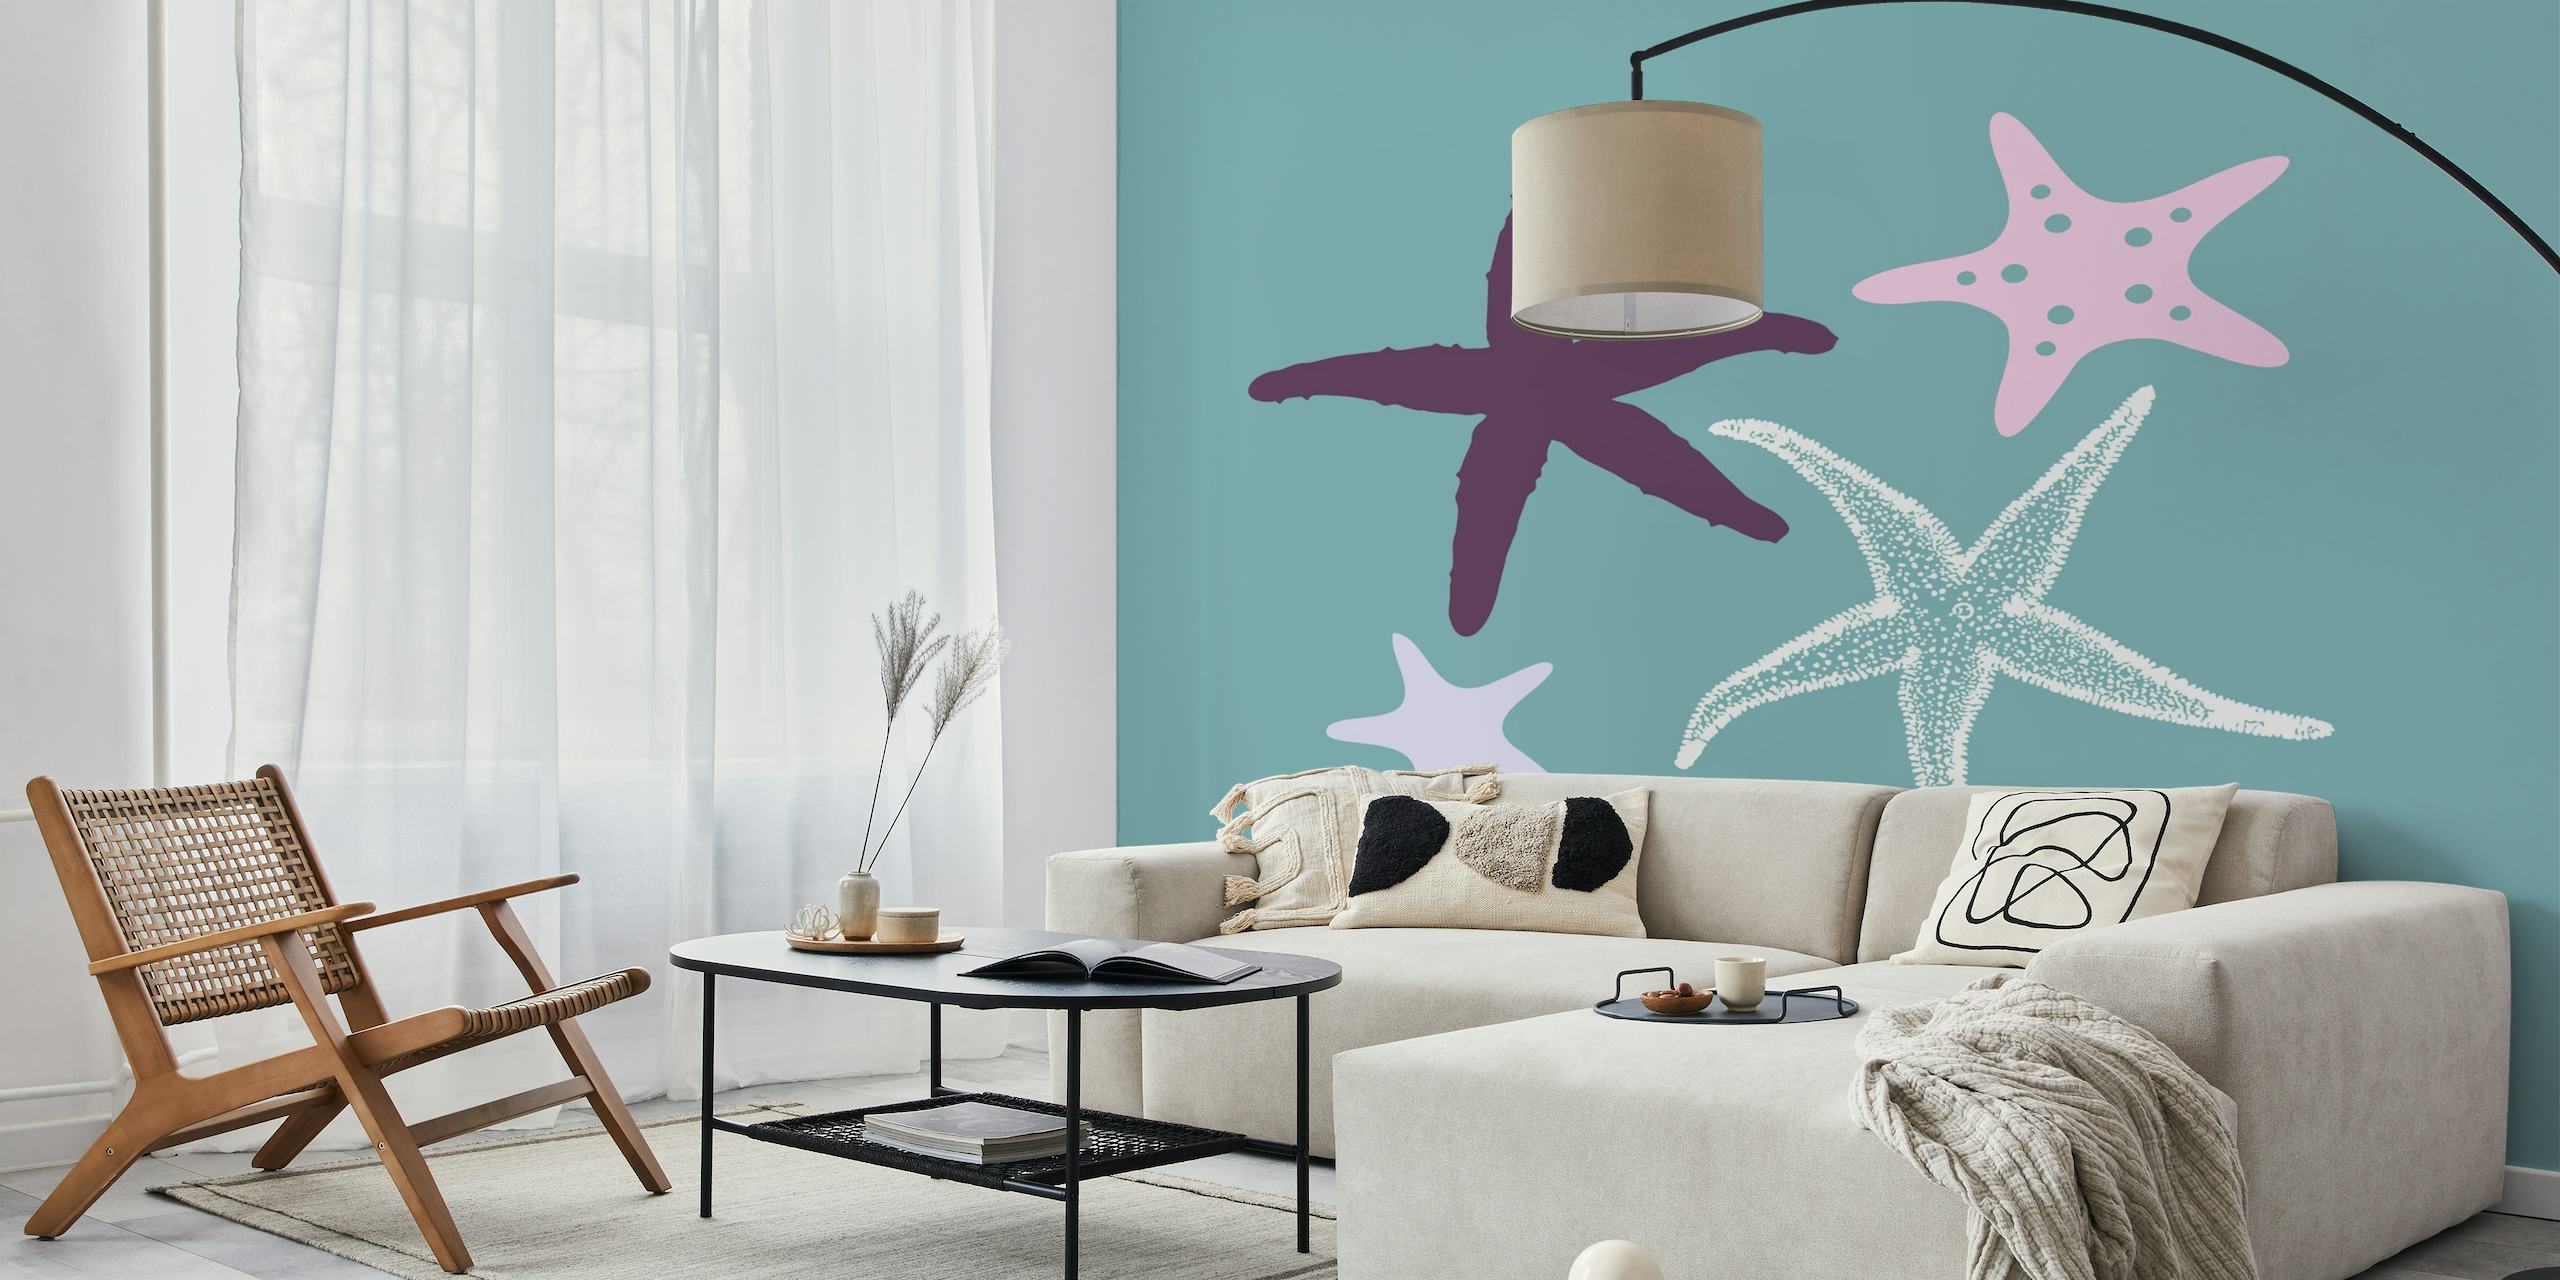 Mint green wall mural with a pattern of softly-colored sea stars in shades of purple and white.